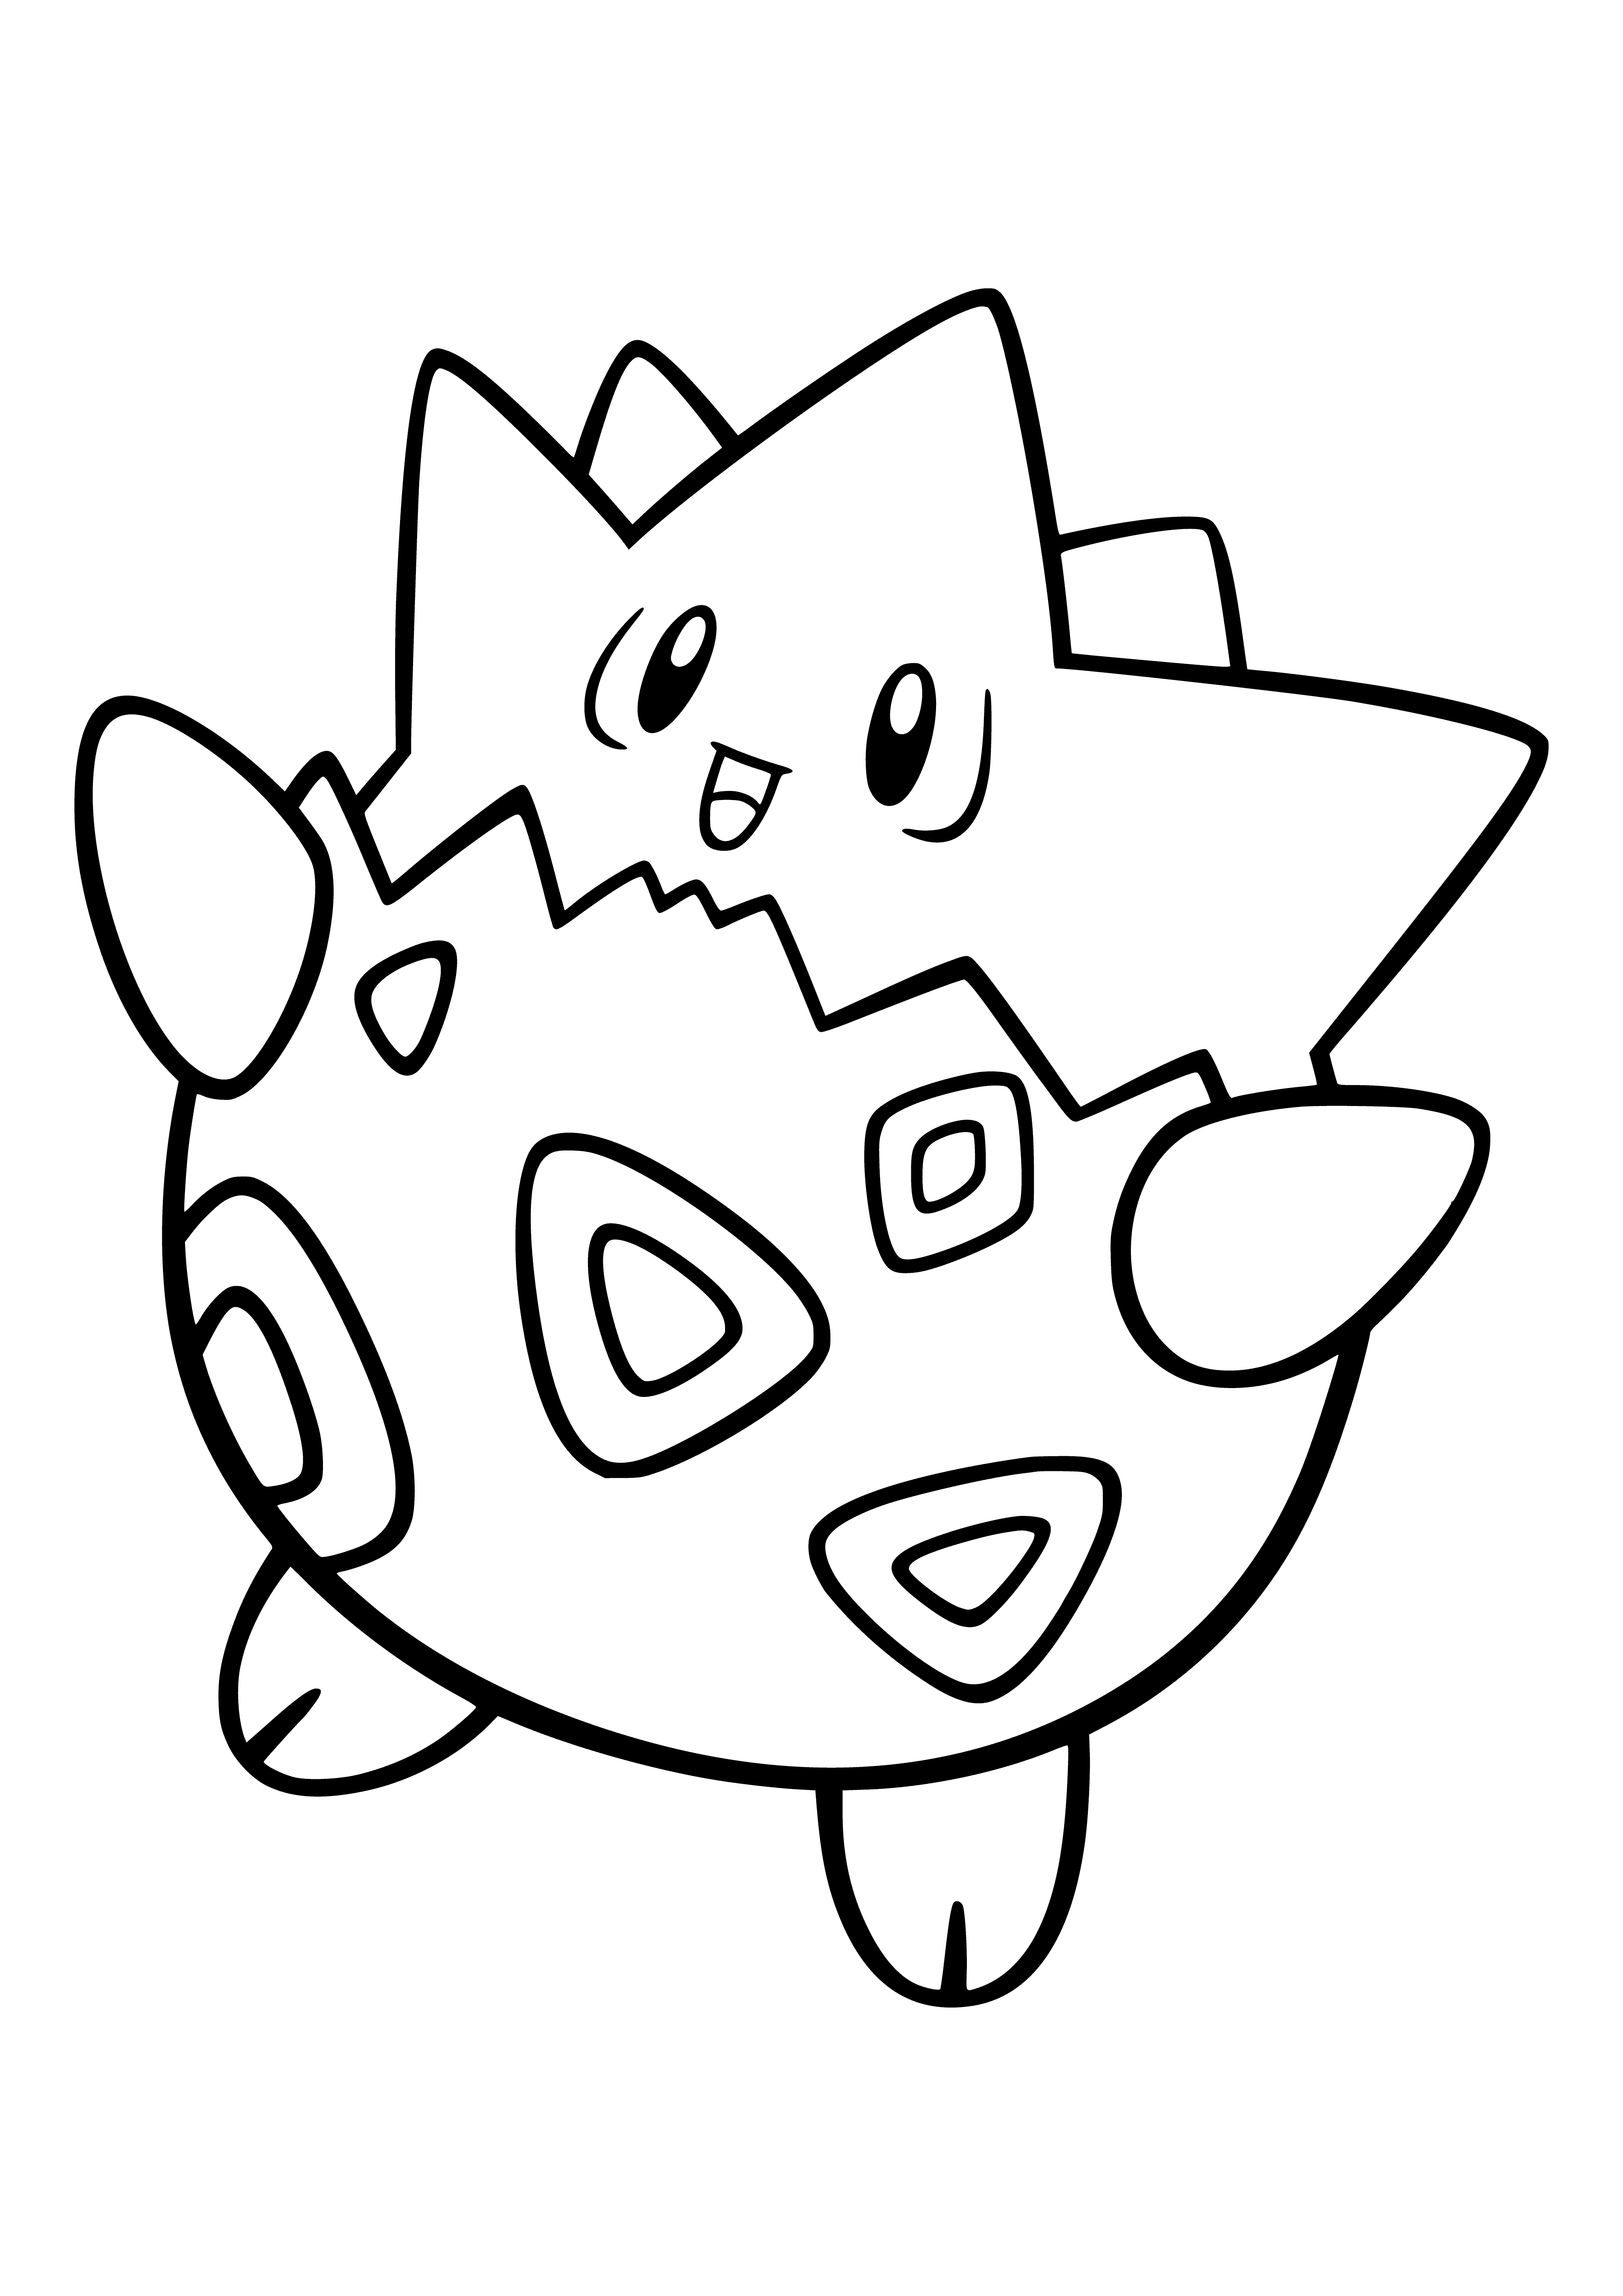 coloring page: Small, round, blue with red spots, large eyes and crest; Togepi has stubby arms/legs and small mouth.